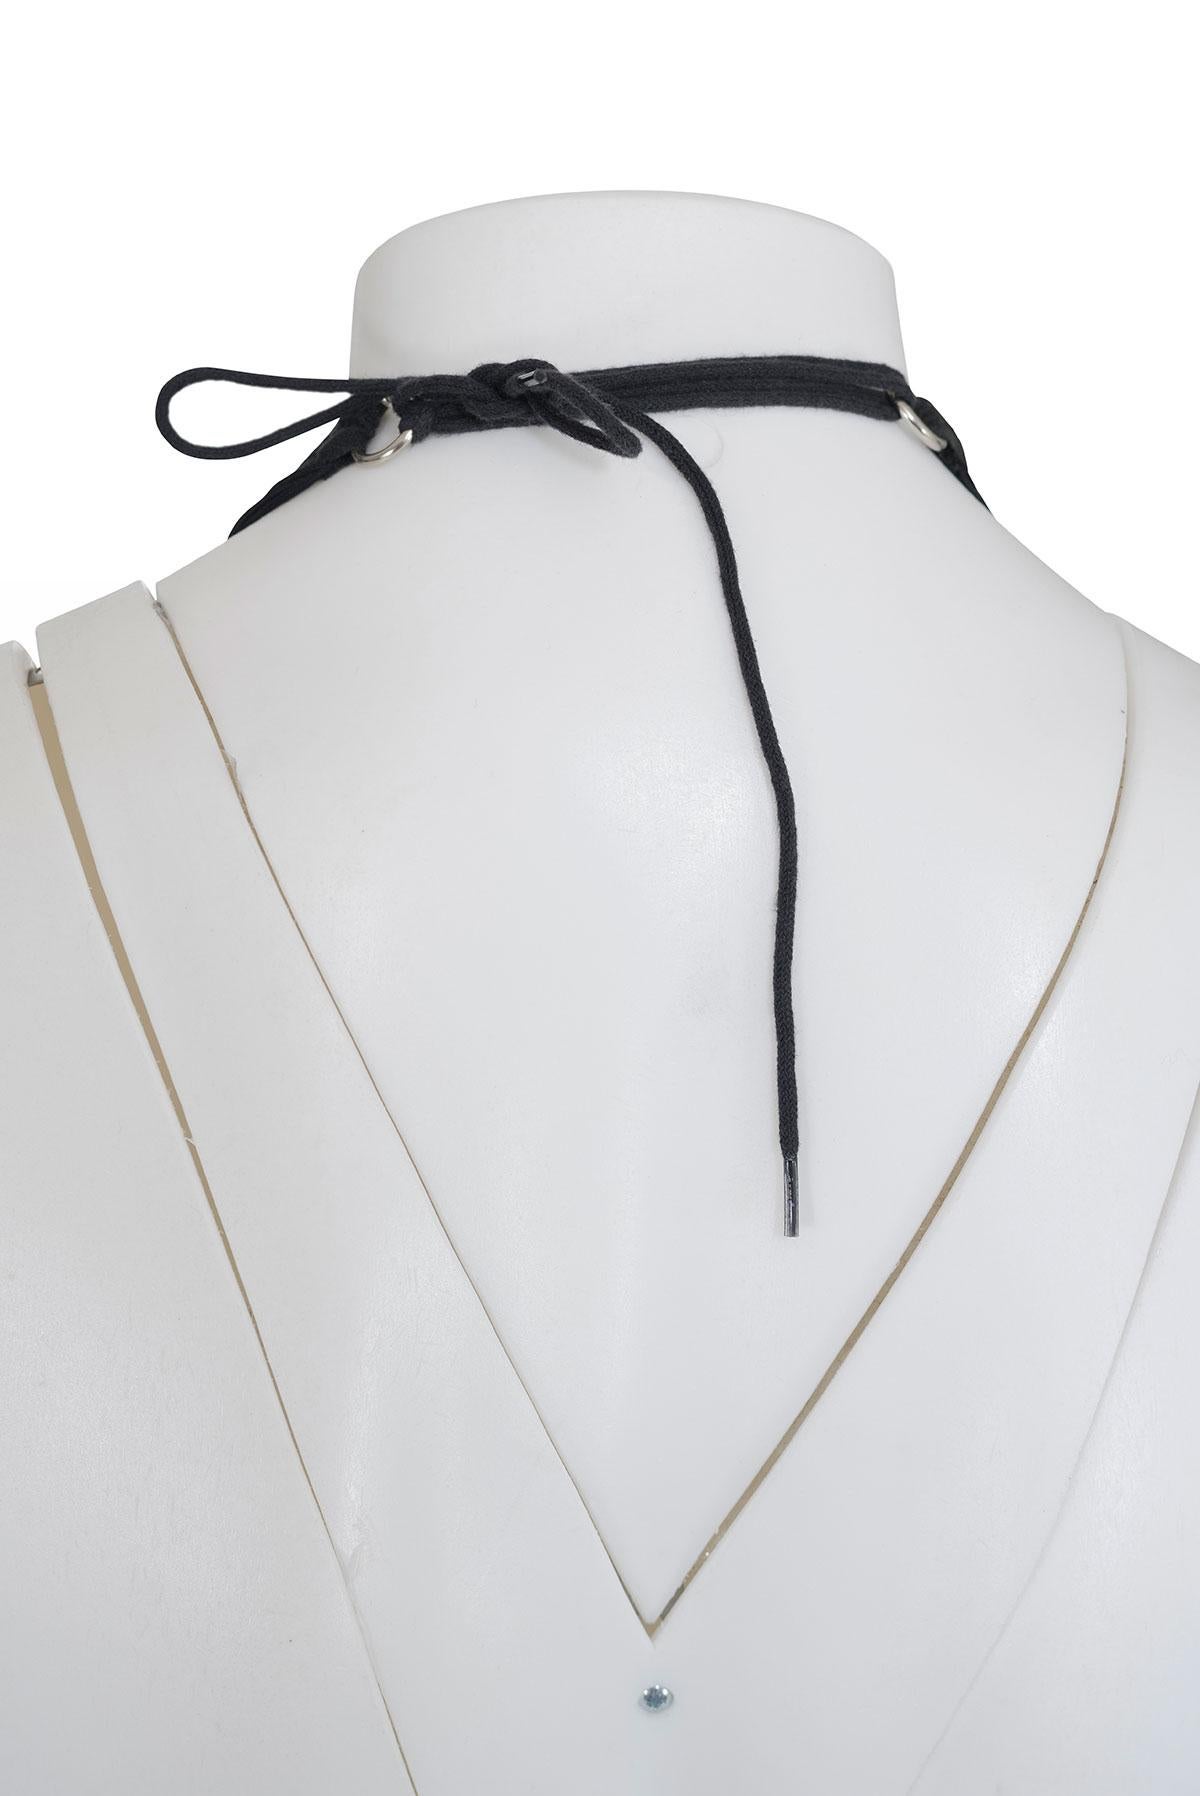 Fall Winter 1996 rare long fringes necklace by Maison Martin Margiela.
Adjustable string.